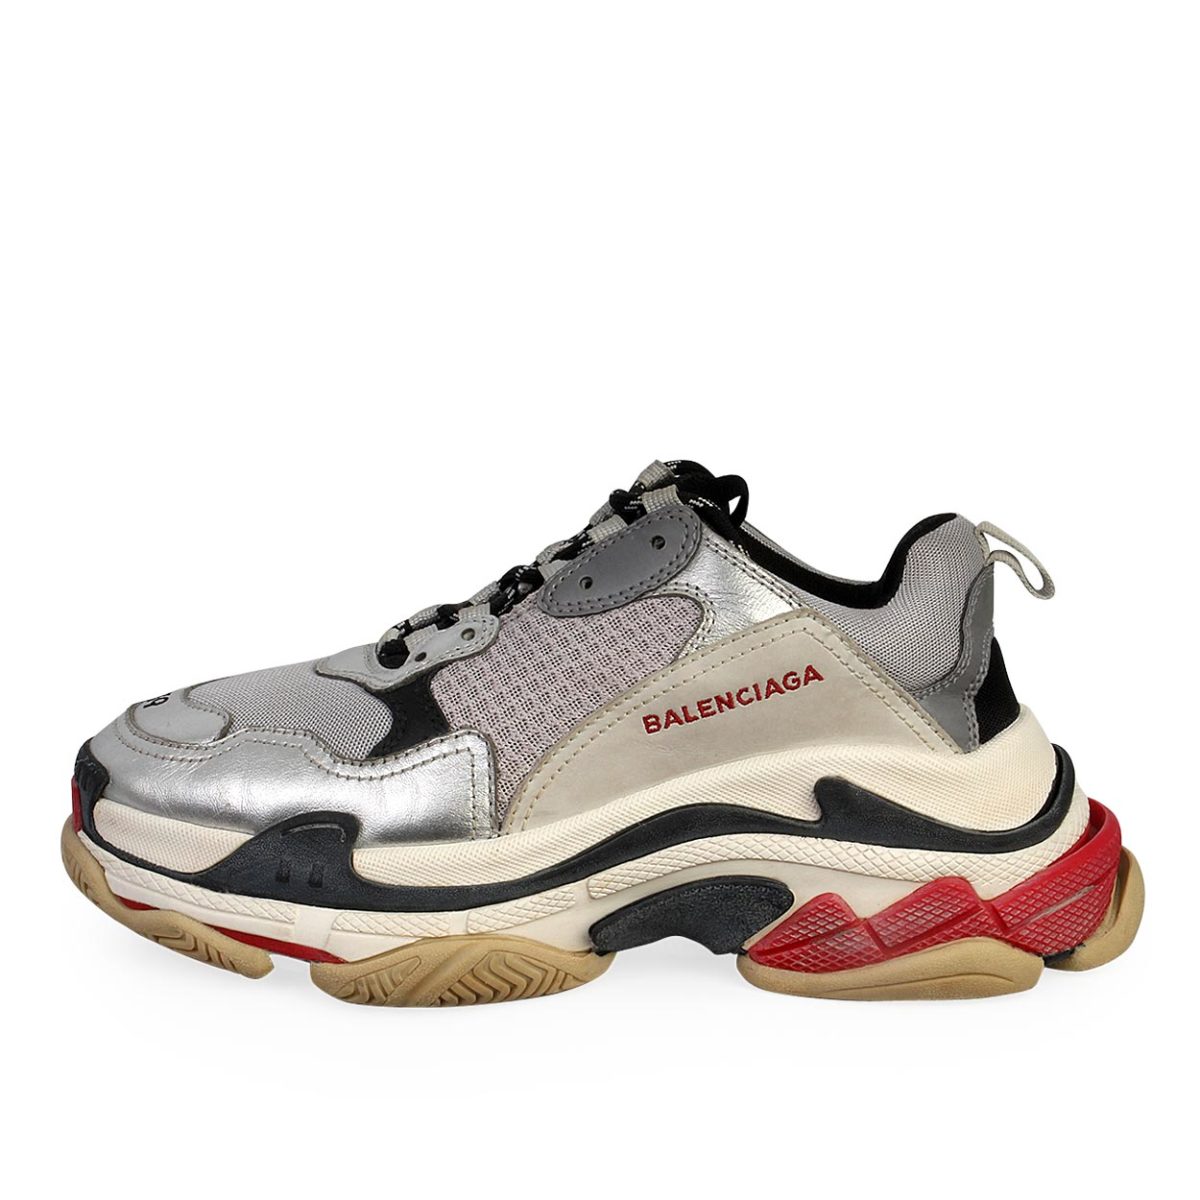 Balenciaga Triple S in red silver and white leather and double